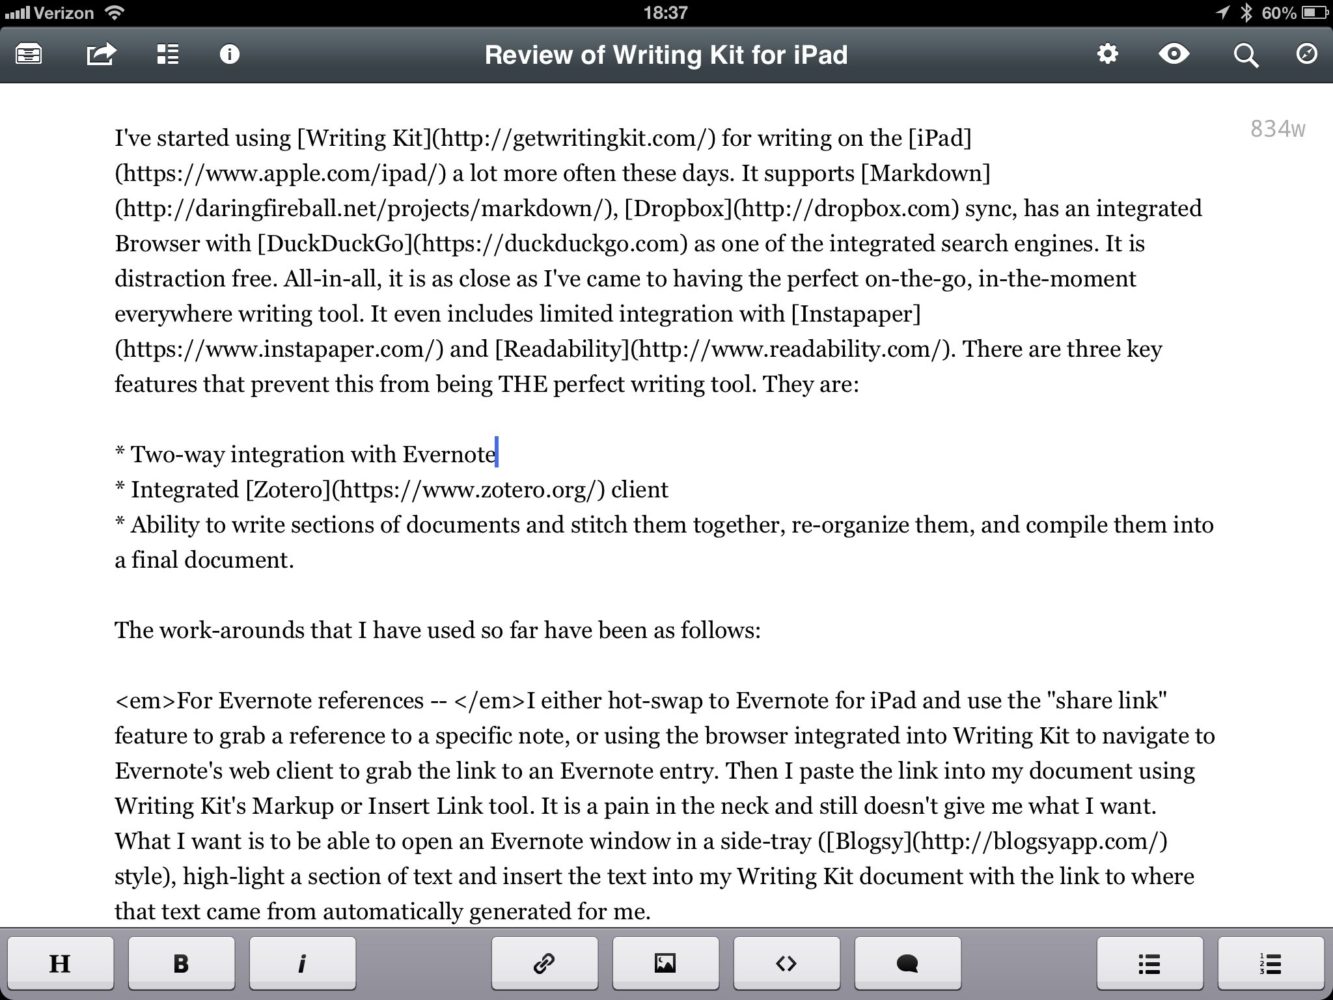 5 Best Writing Apps For Writing on iPad in 2018 - Writing Kit